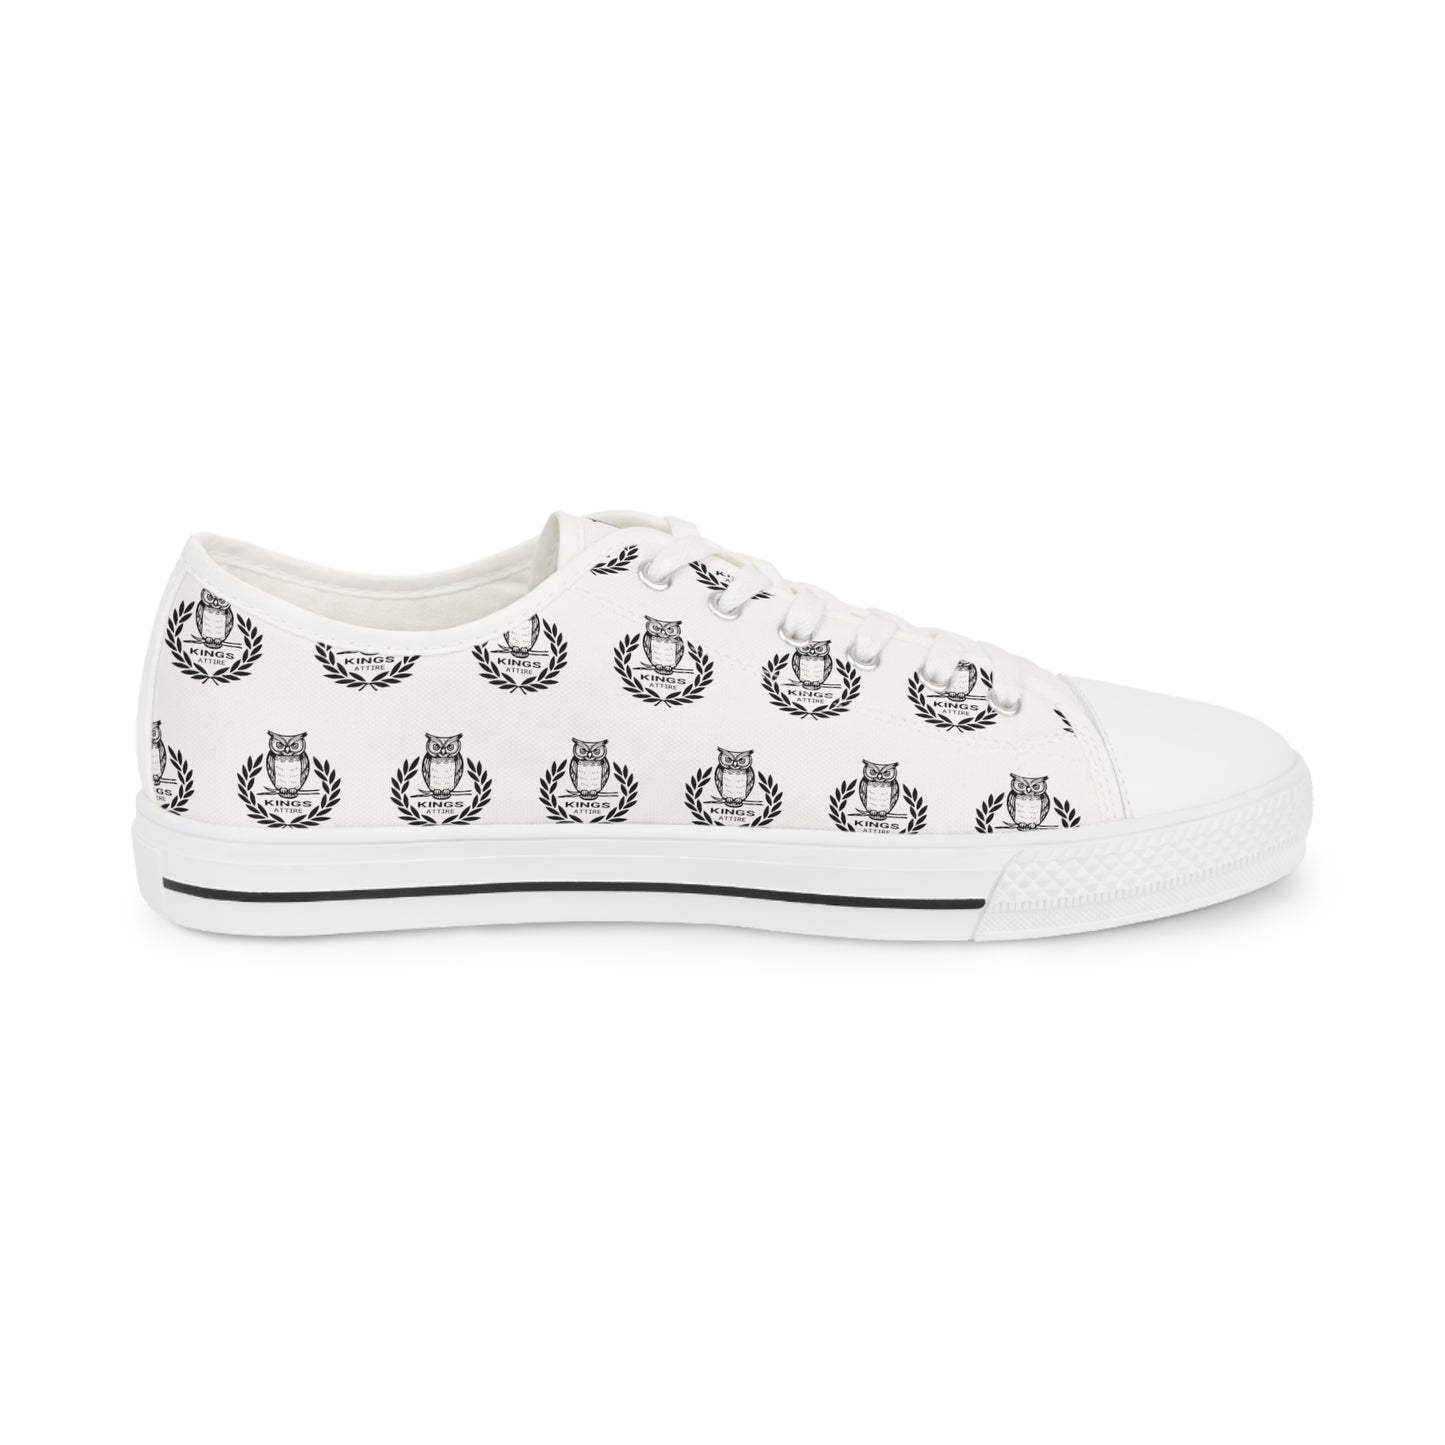 Kings Attire Low Tops (White)